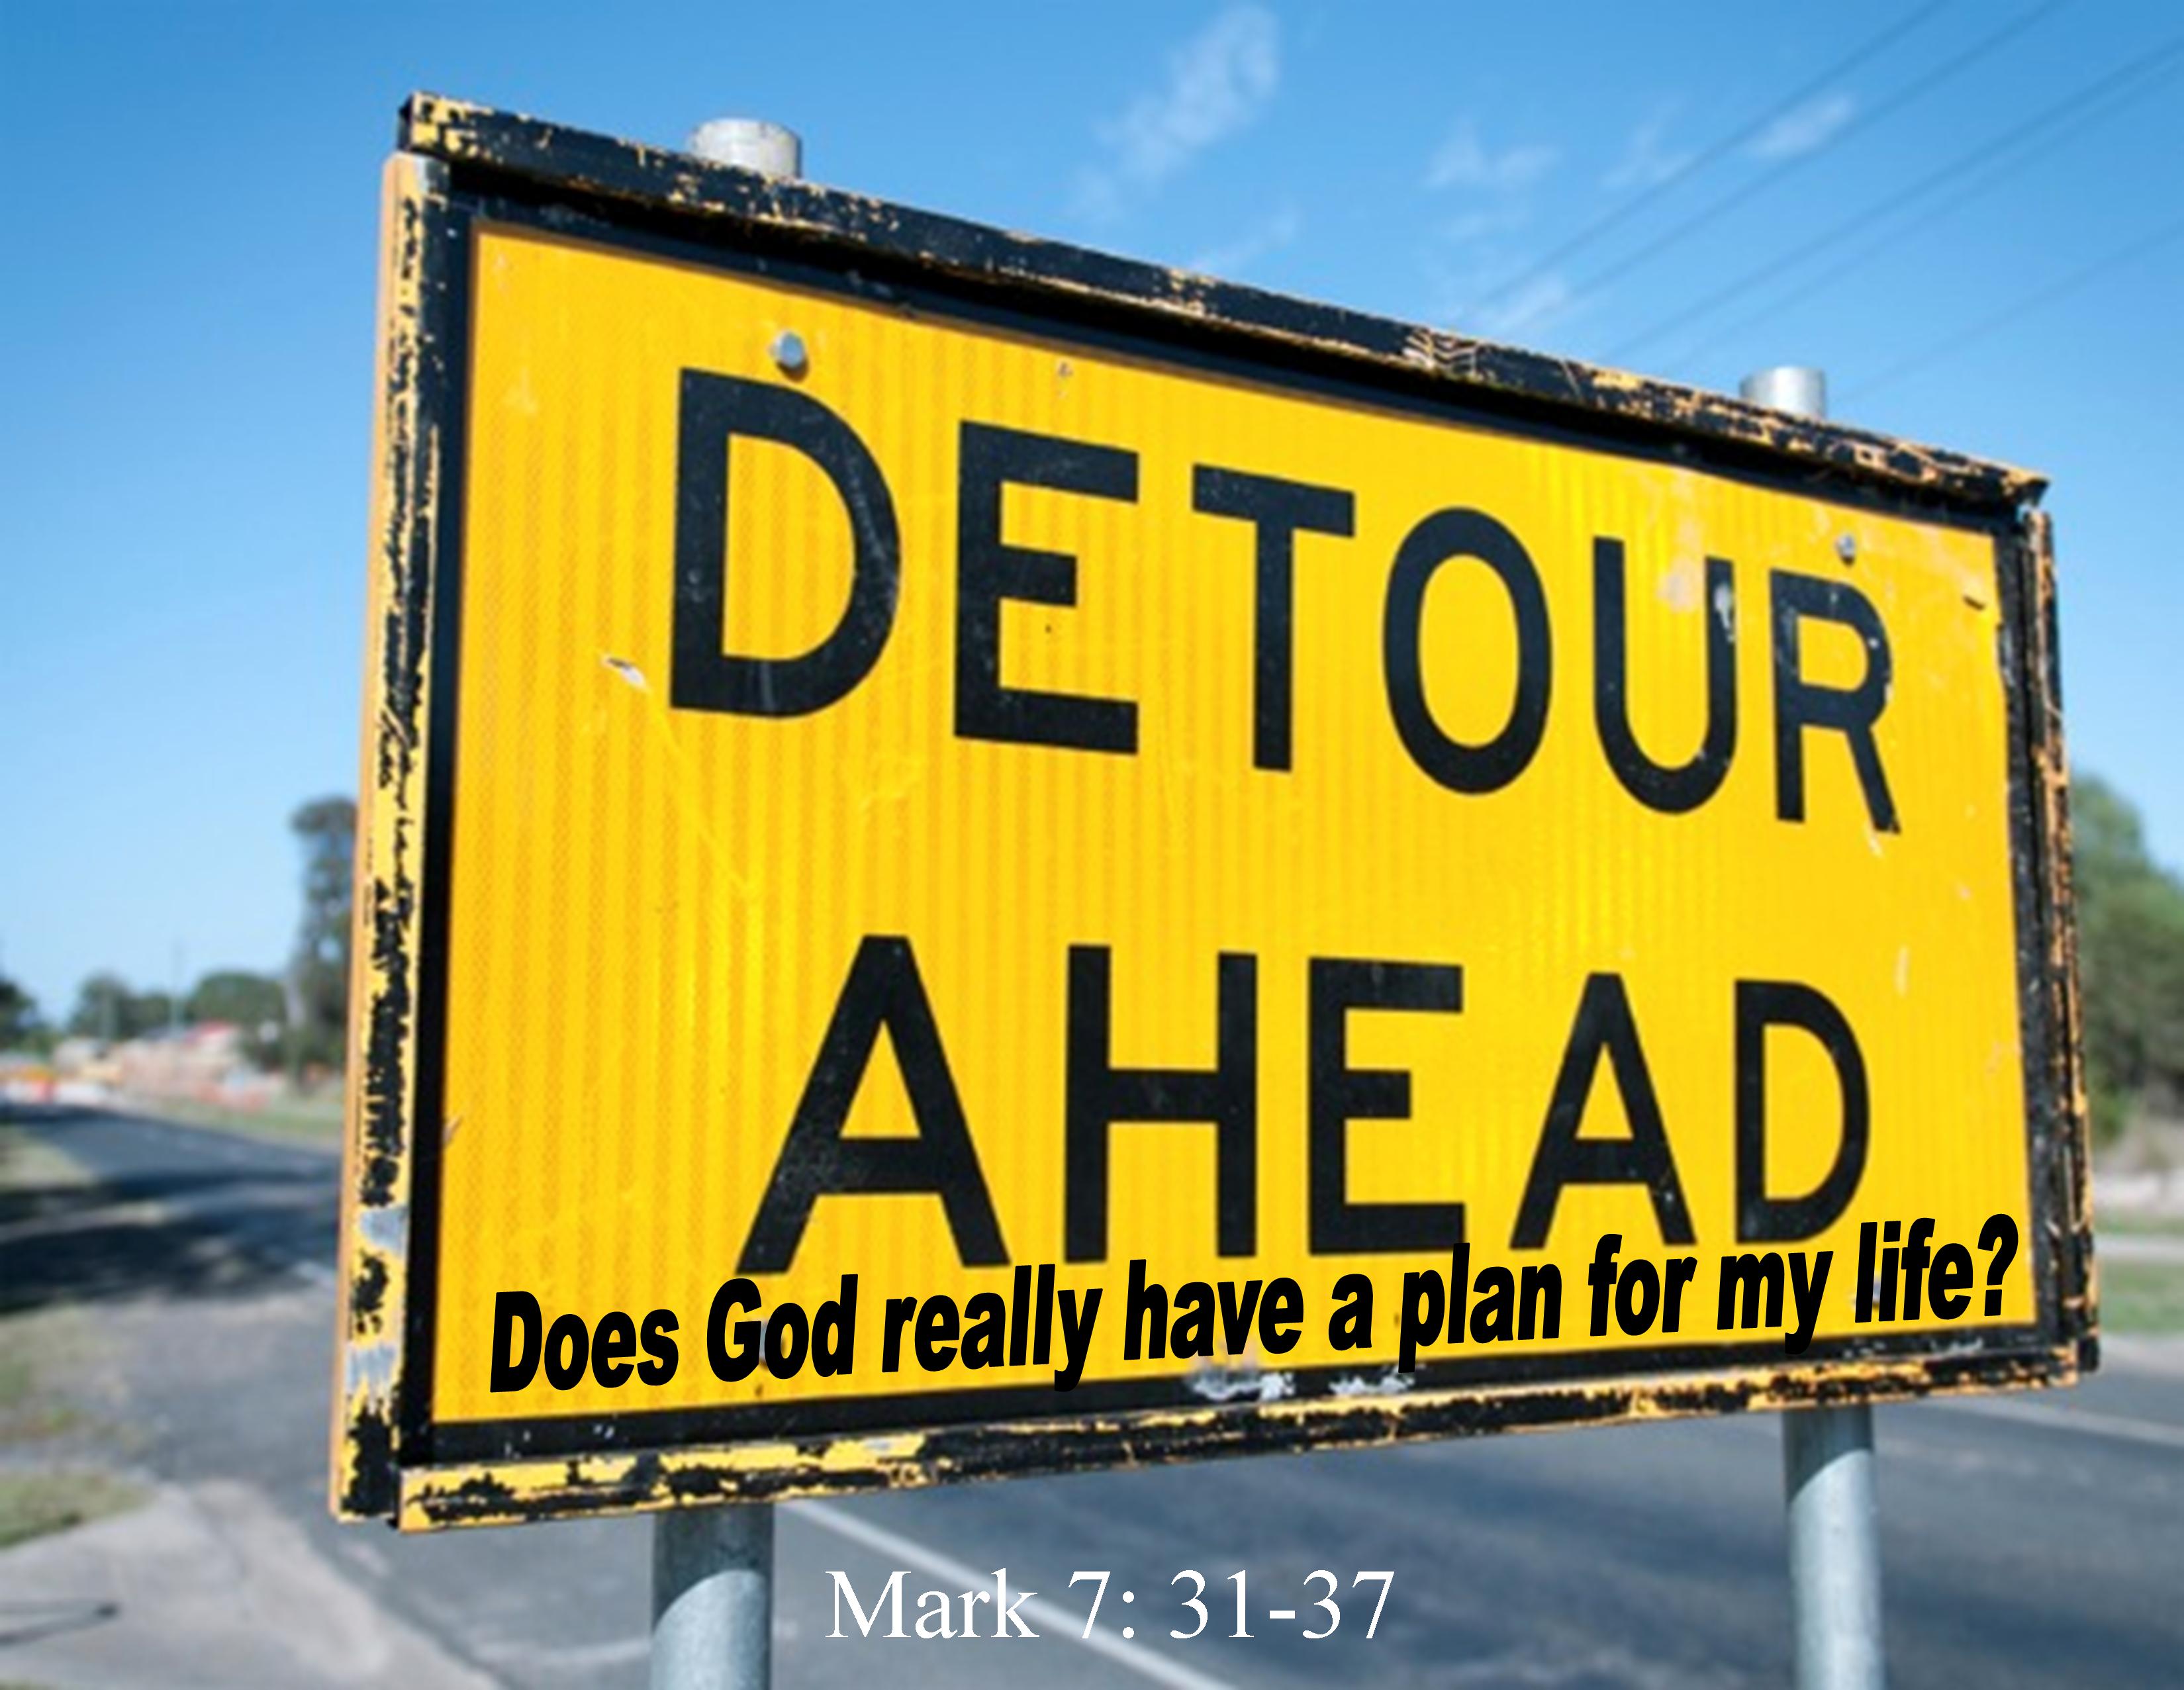 Detour Ahead! Does God really have a plan for my life? - Mark 7:31-37